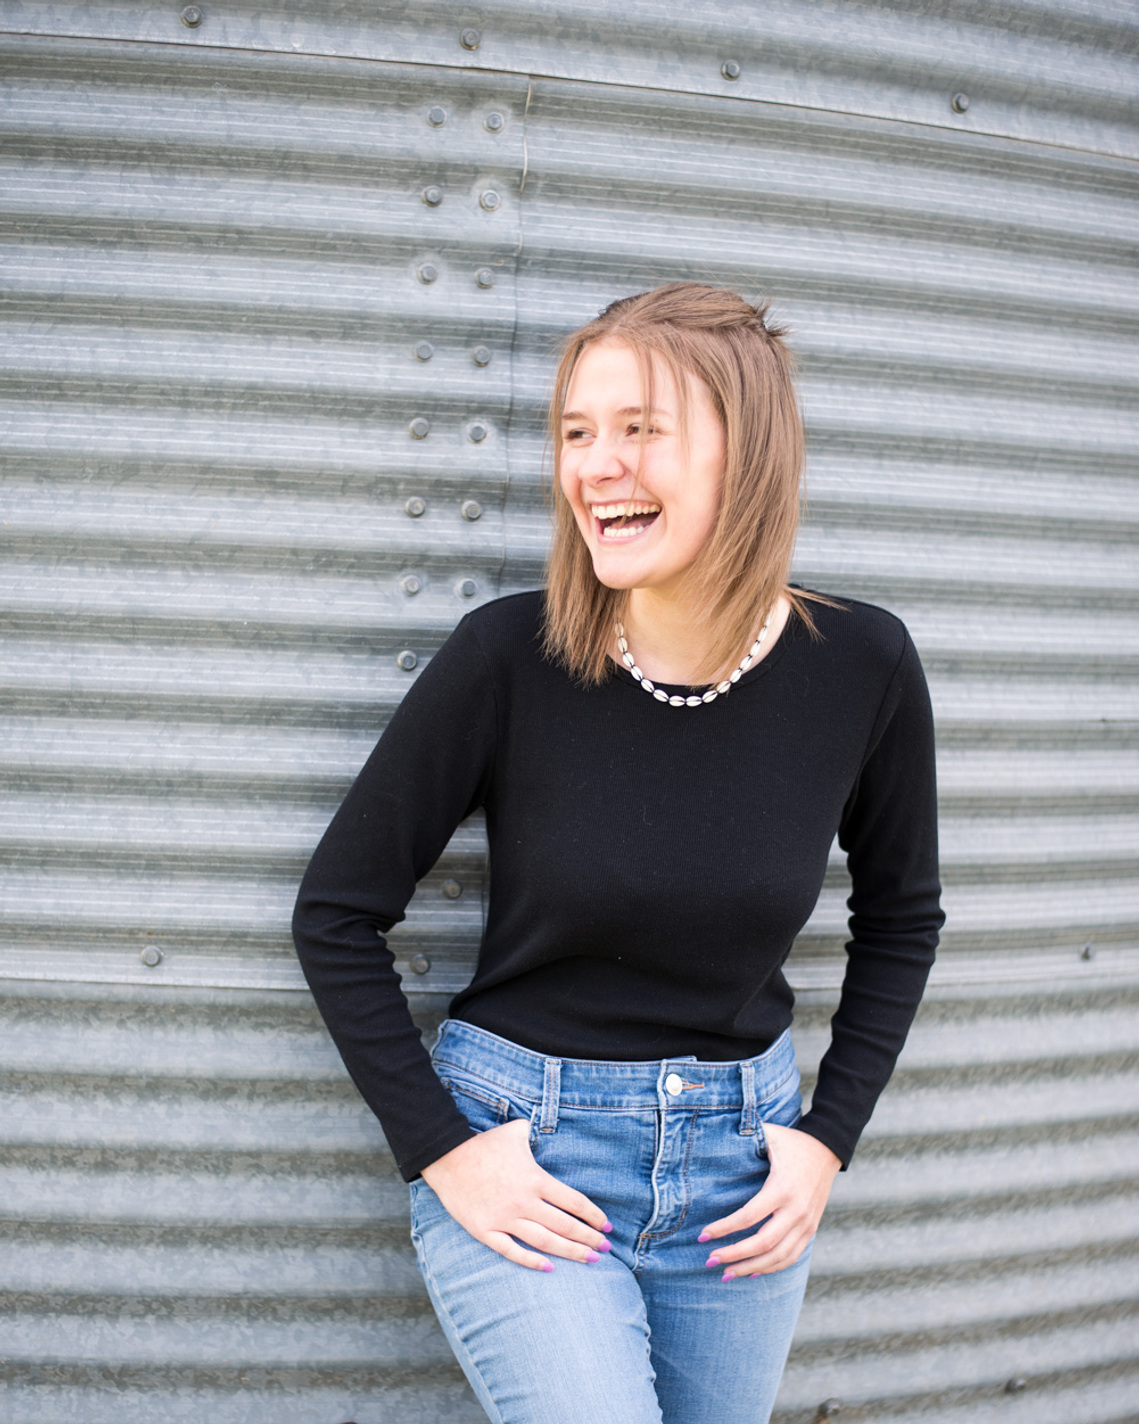 Portrait of a teenage girl in a black t-shirt and jeans in front of grain bin, looking off to the side and laughing